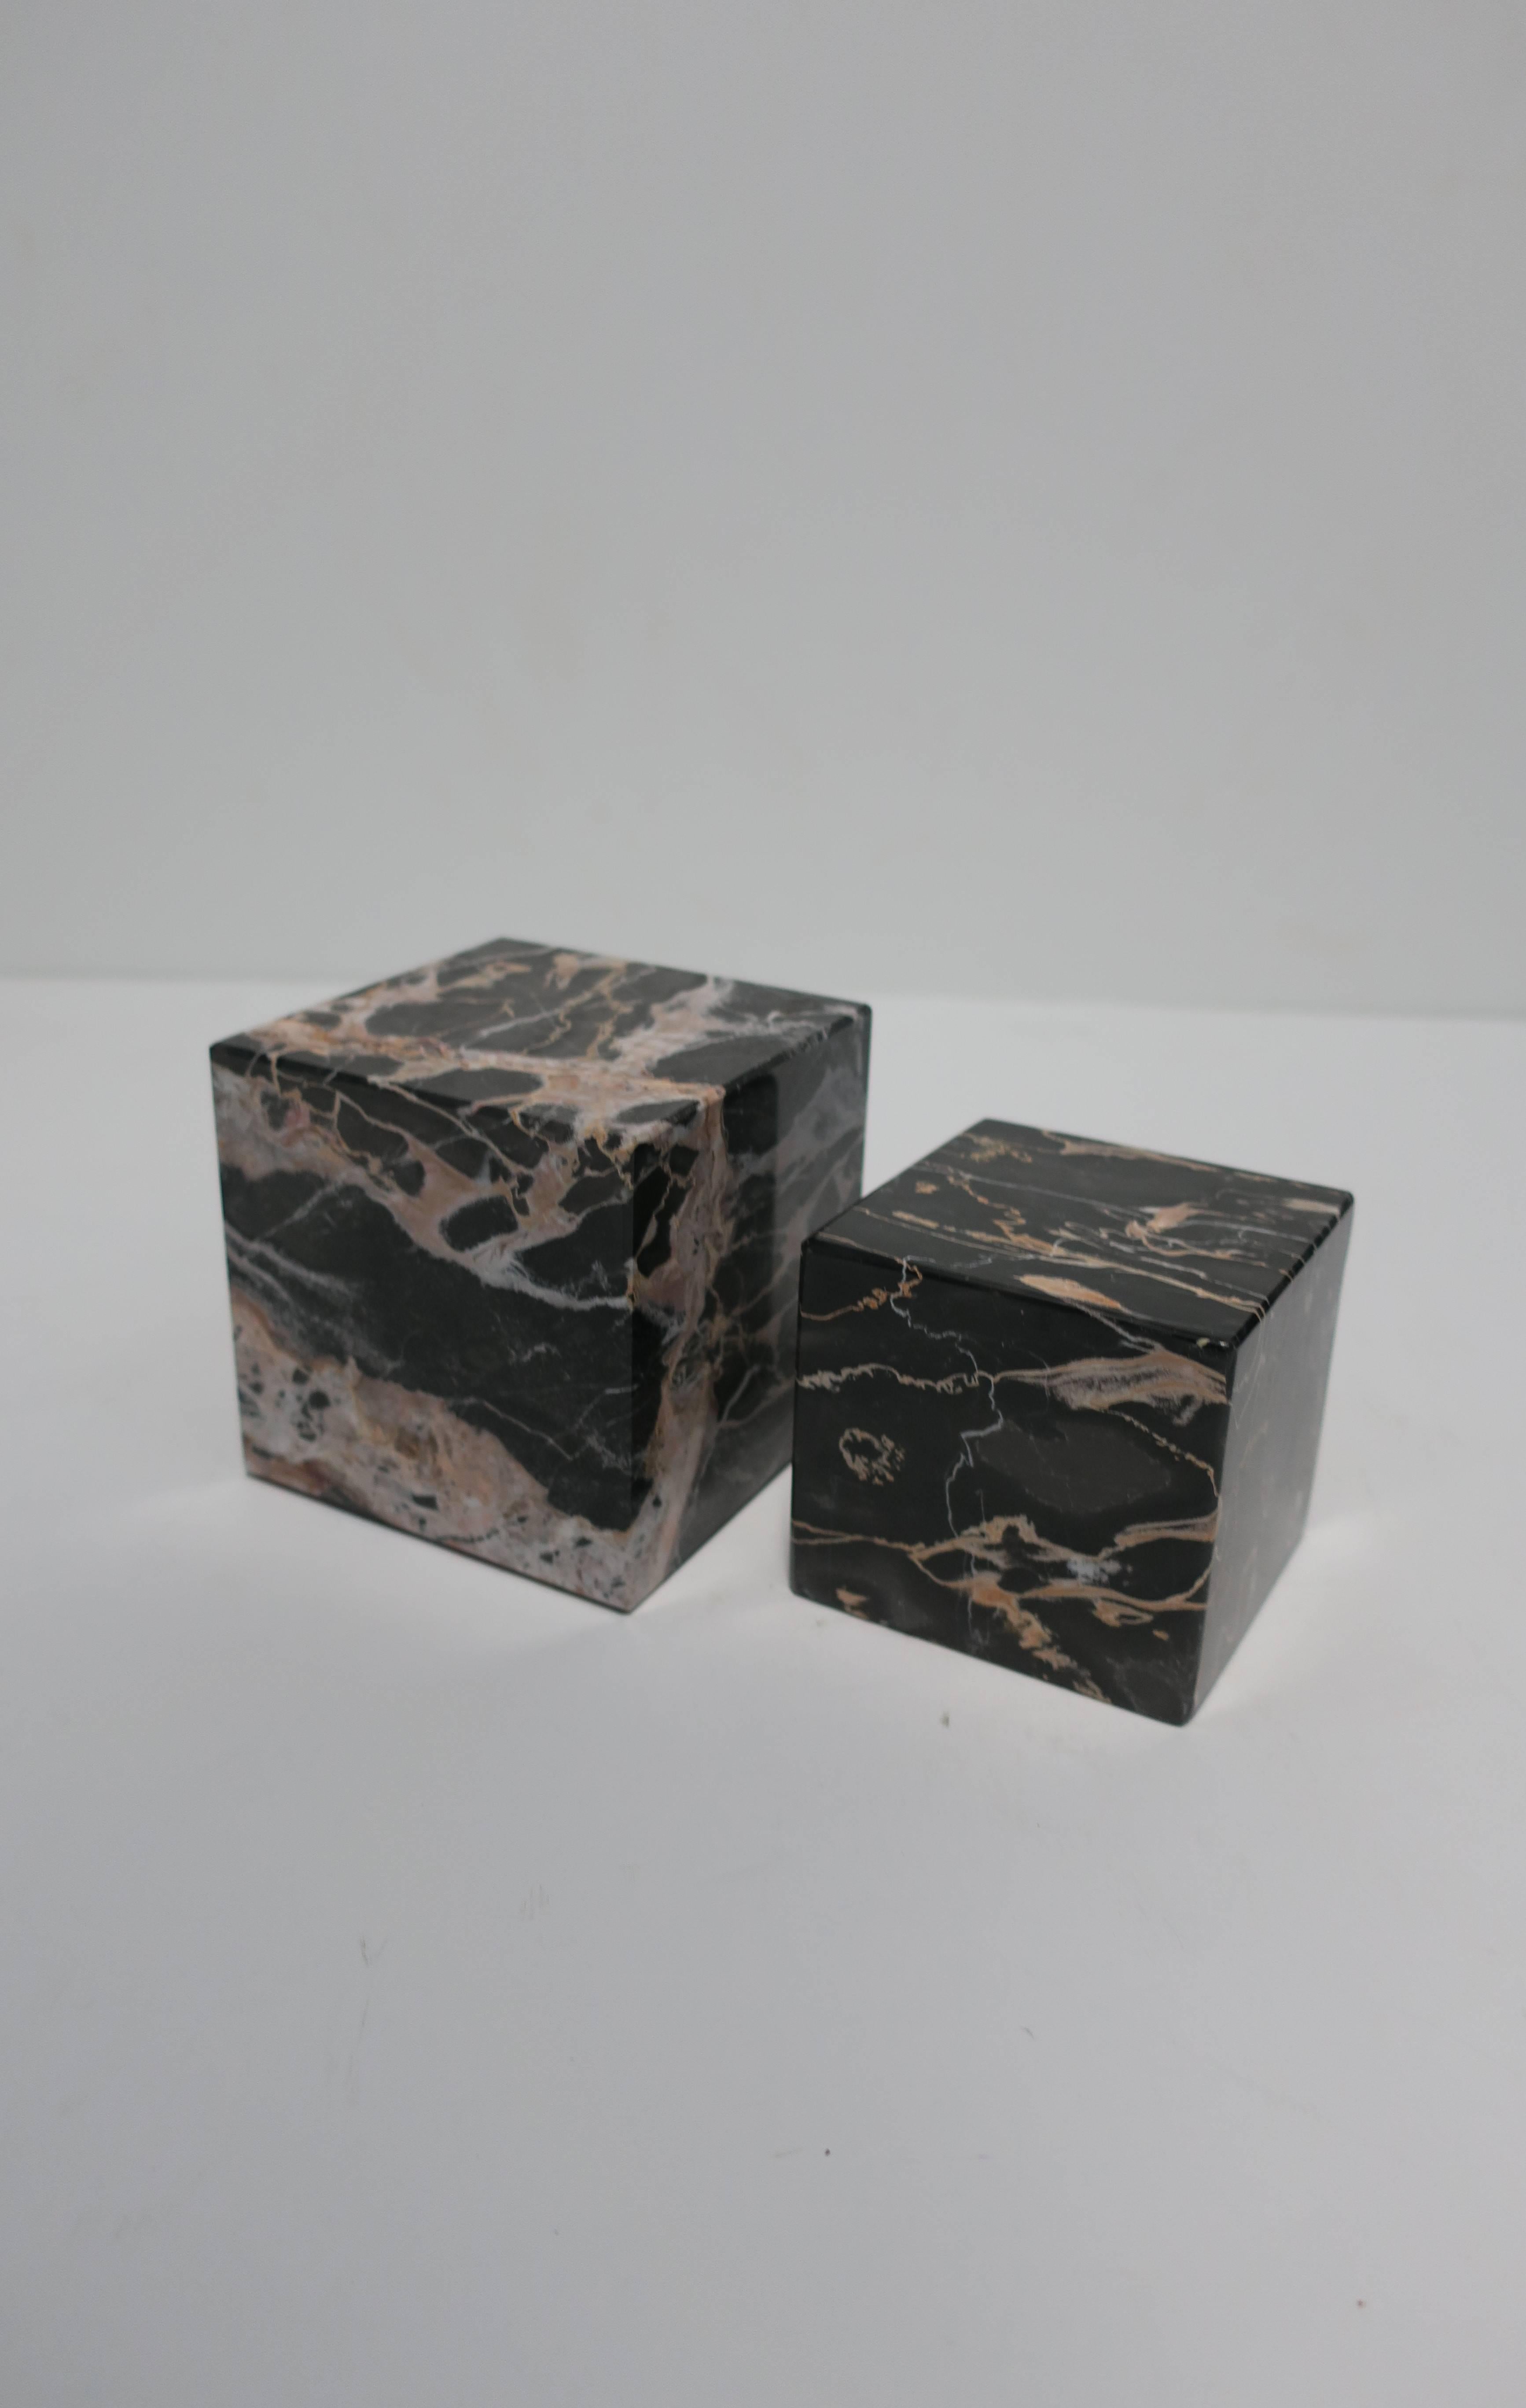 Pair of Vintage Black and White Marble Bookends or Pedestals 1